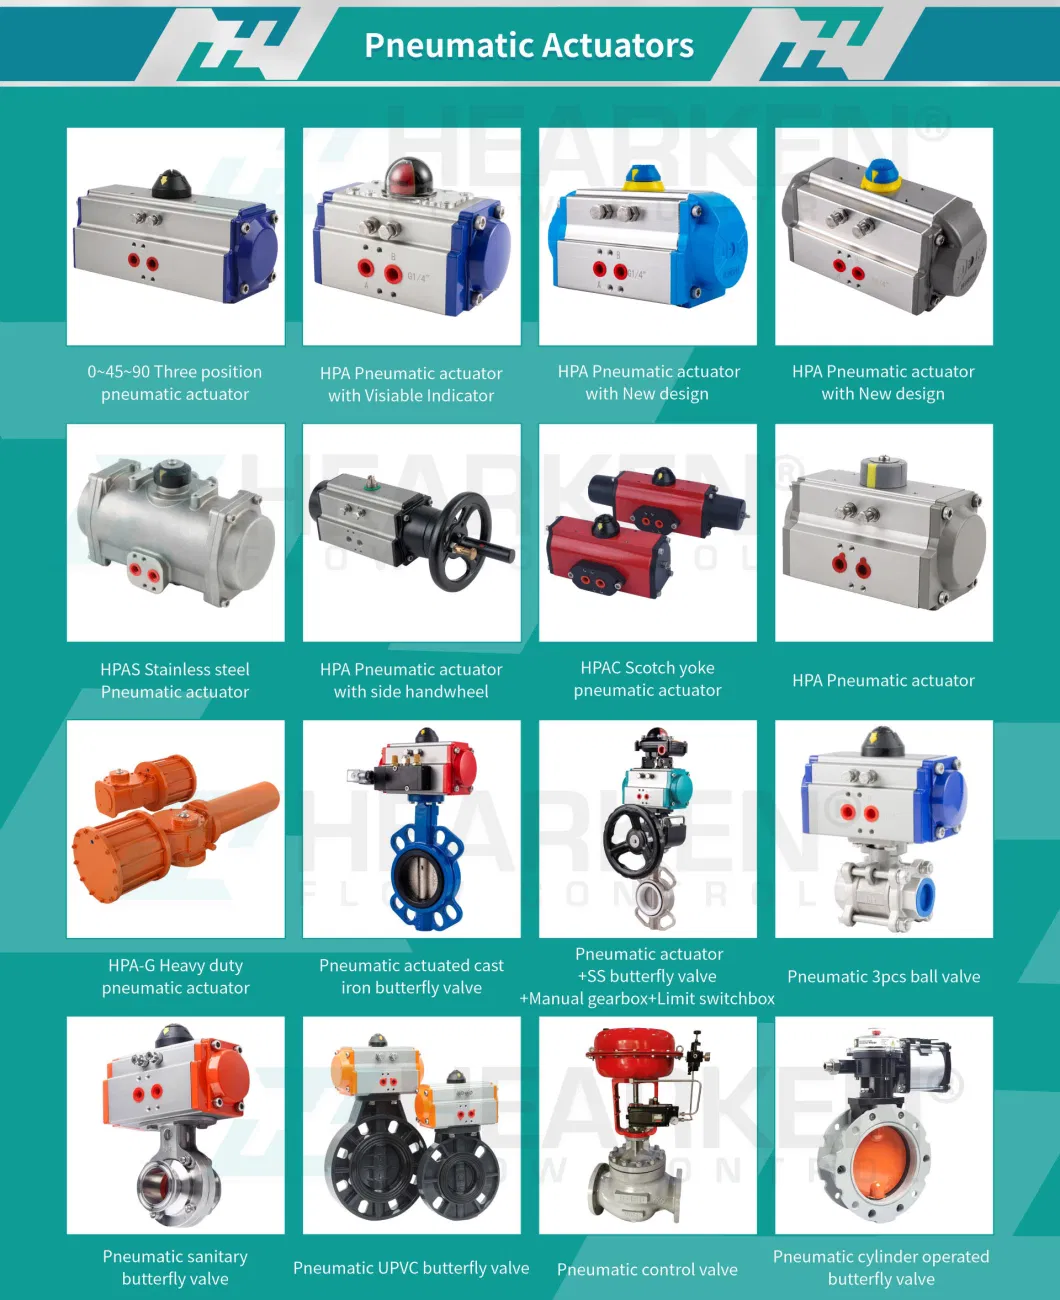 Hearkenflow Flange Wafer Type Stainless Steel Material Electric Ball Valve Pneumatic Actuator